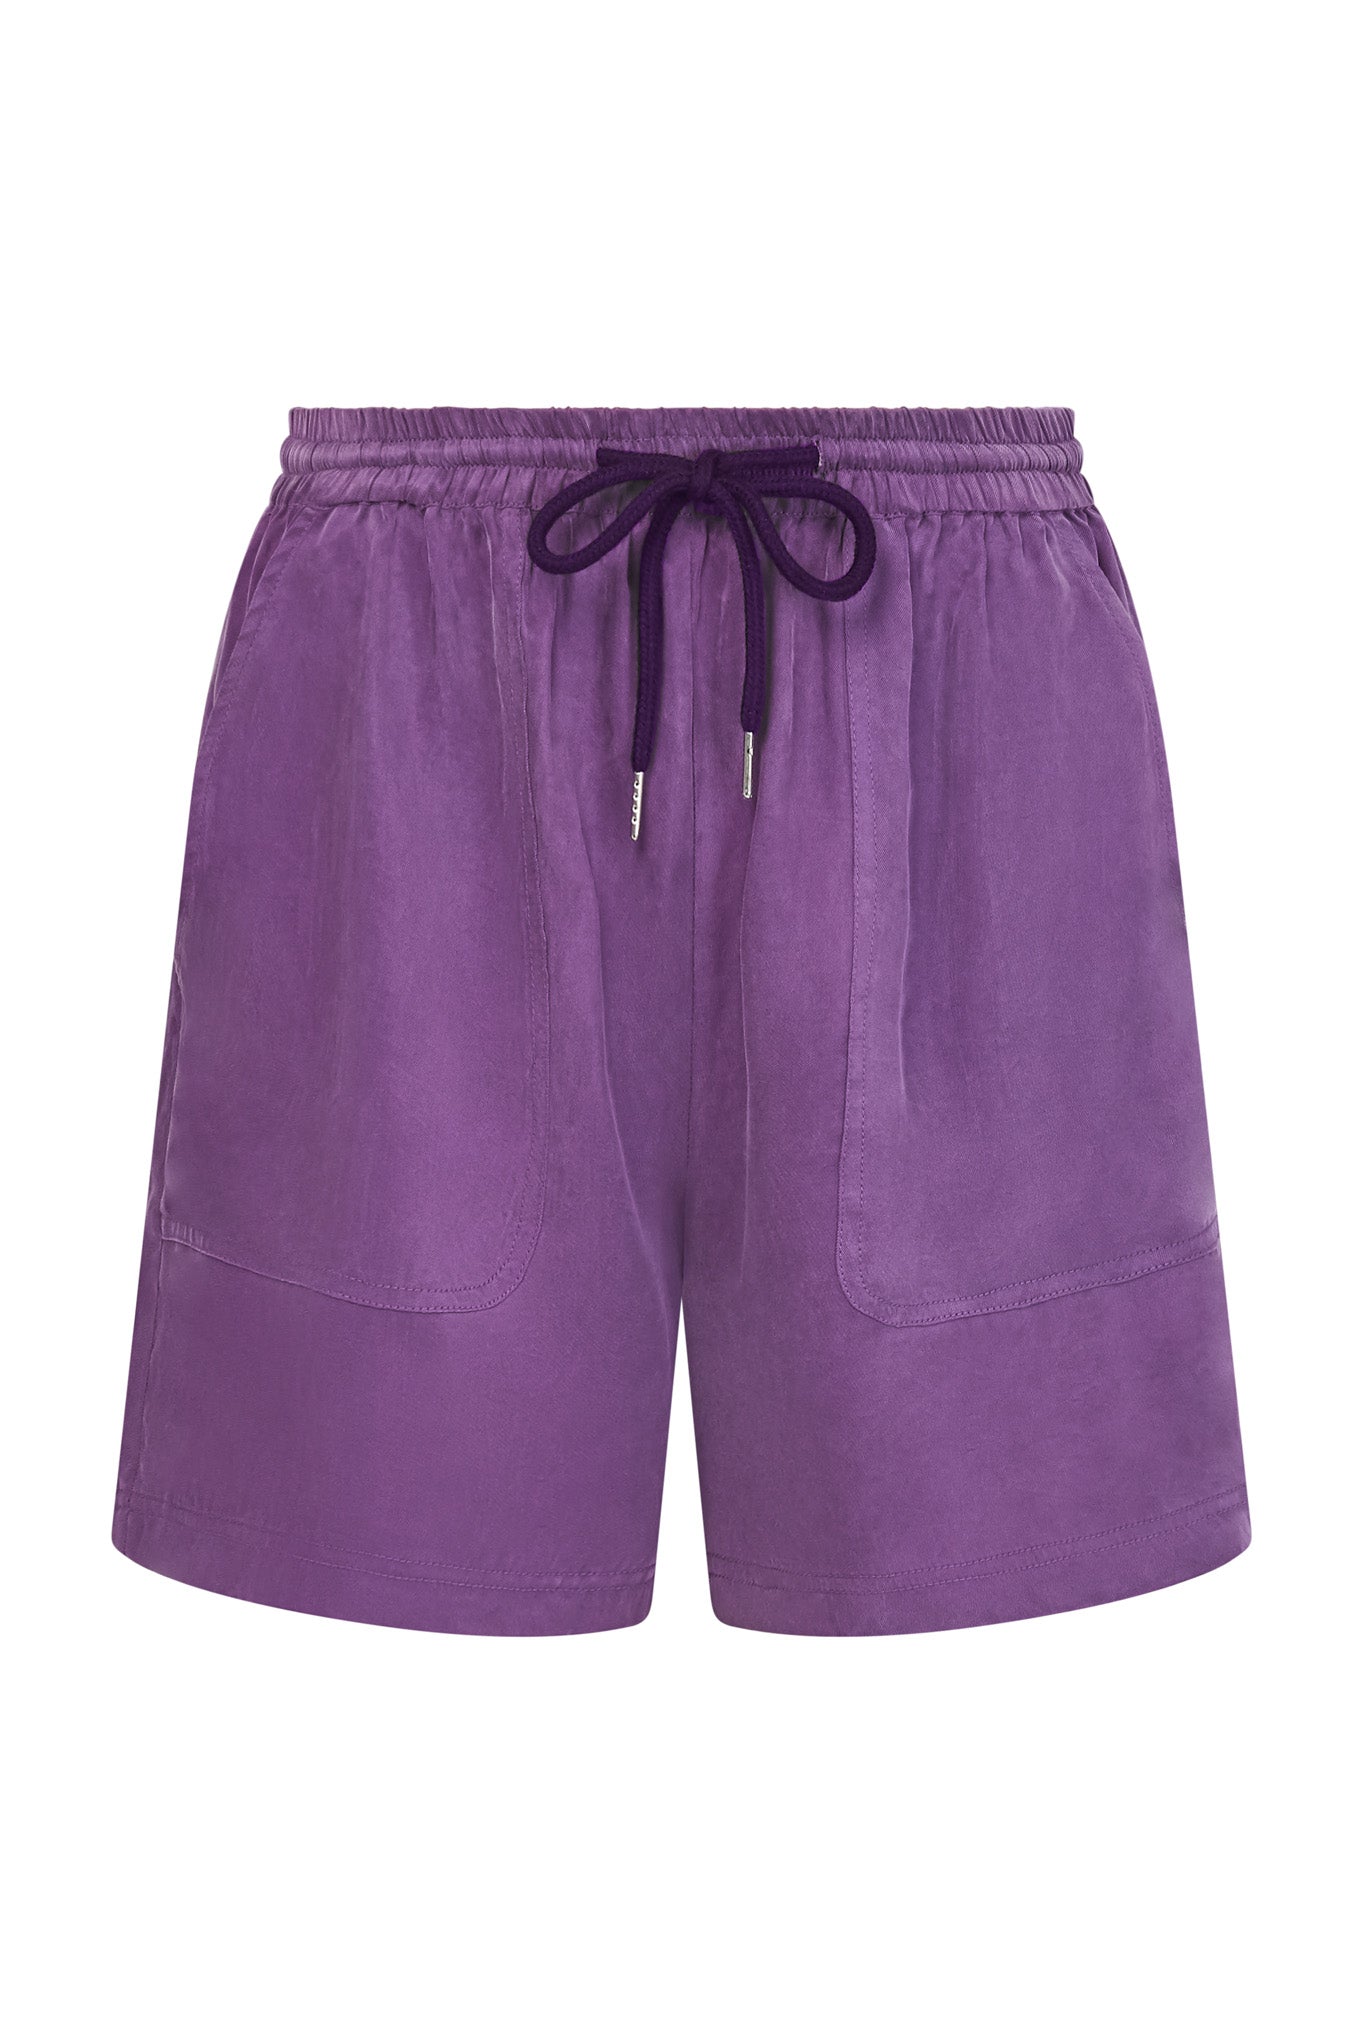 Violet shorts HOLLY made of cupro and Lenzing by Komodo